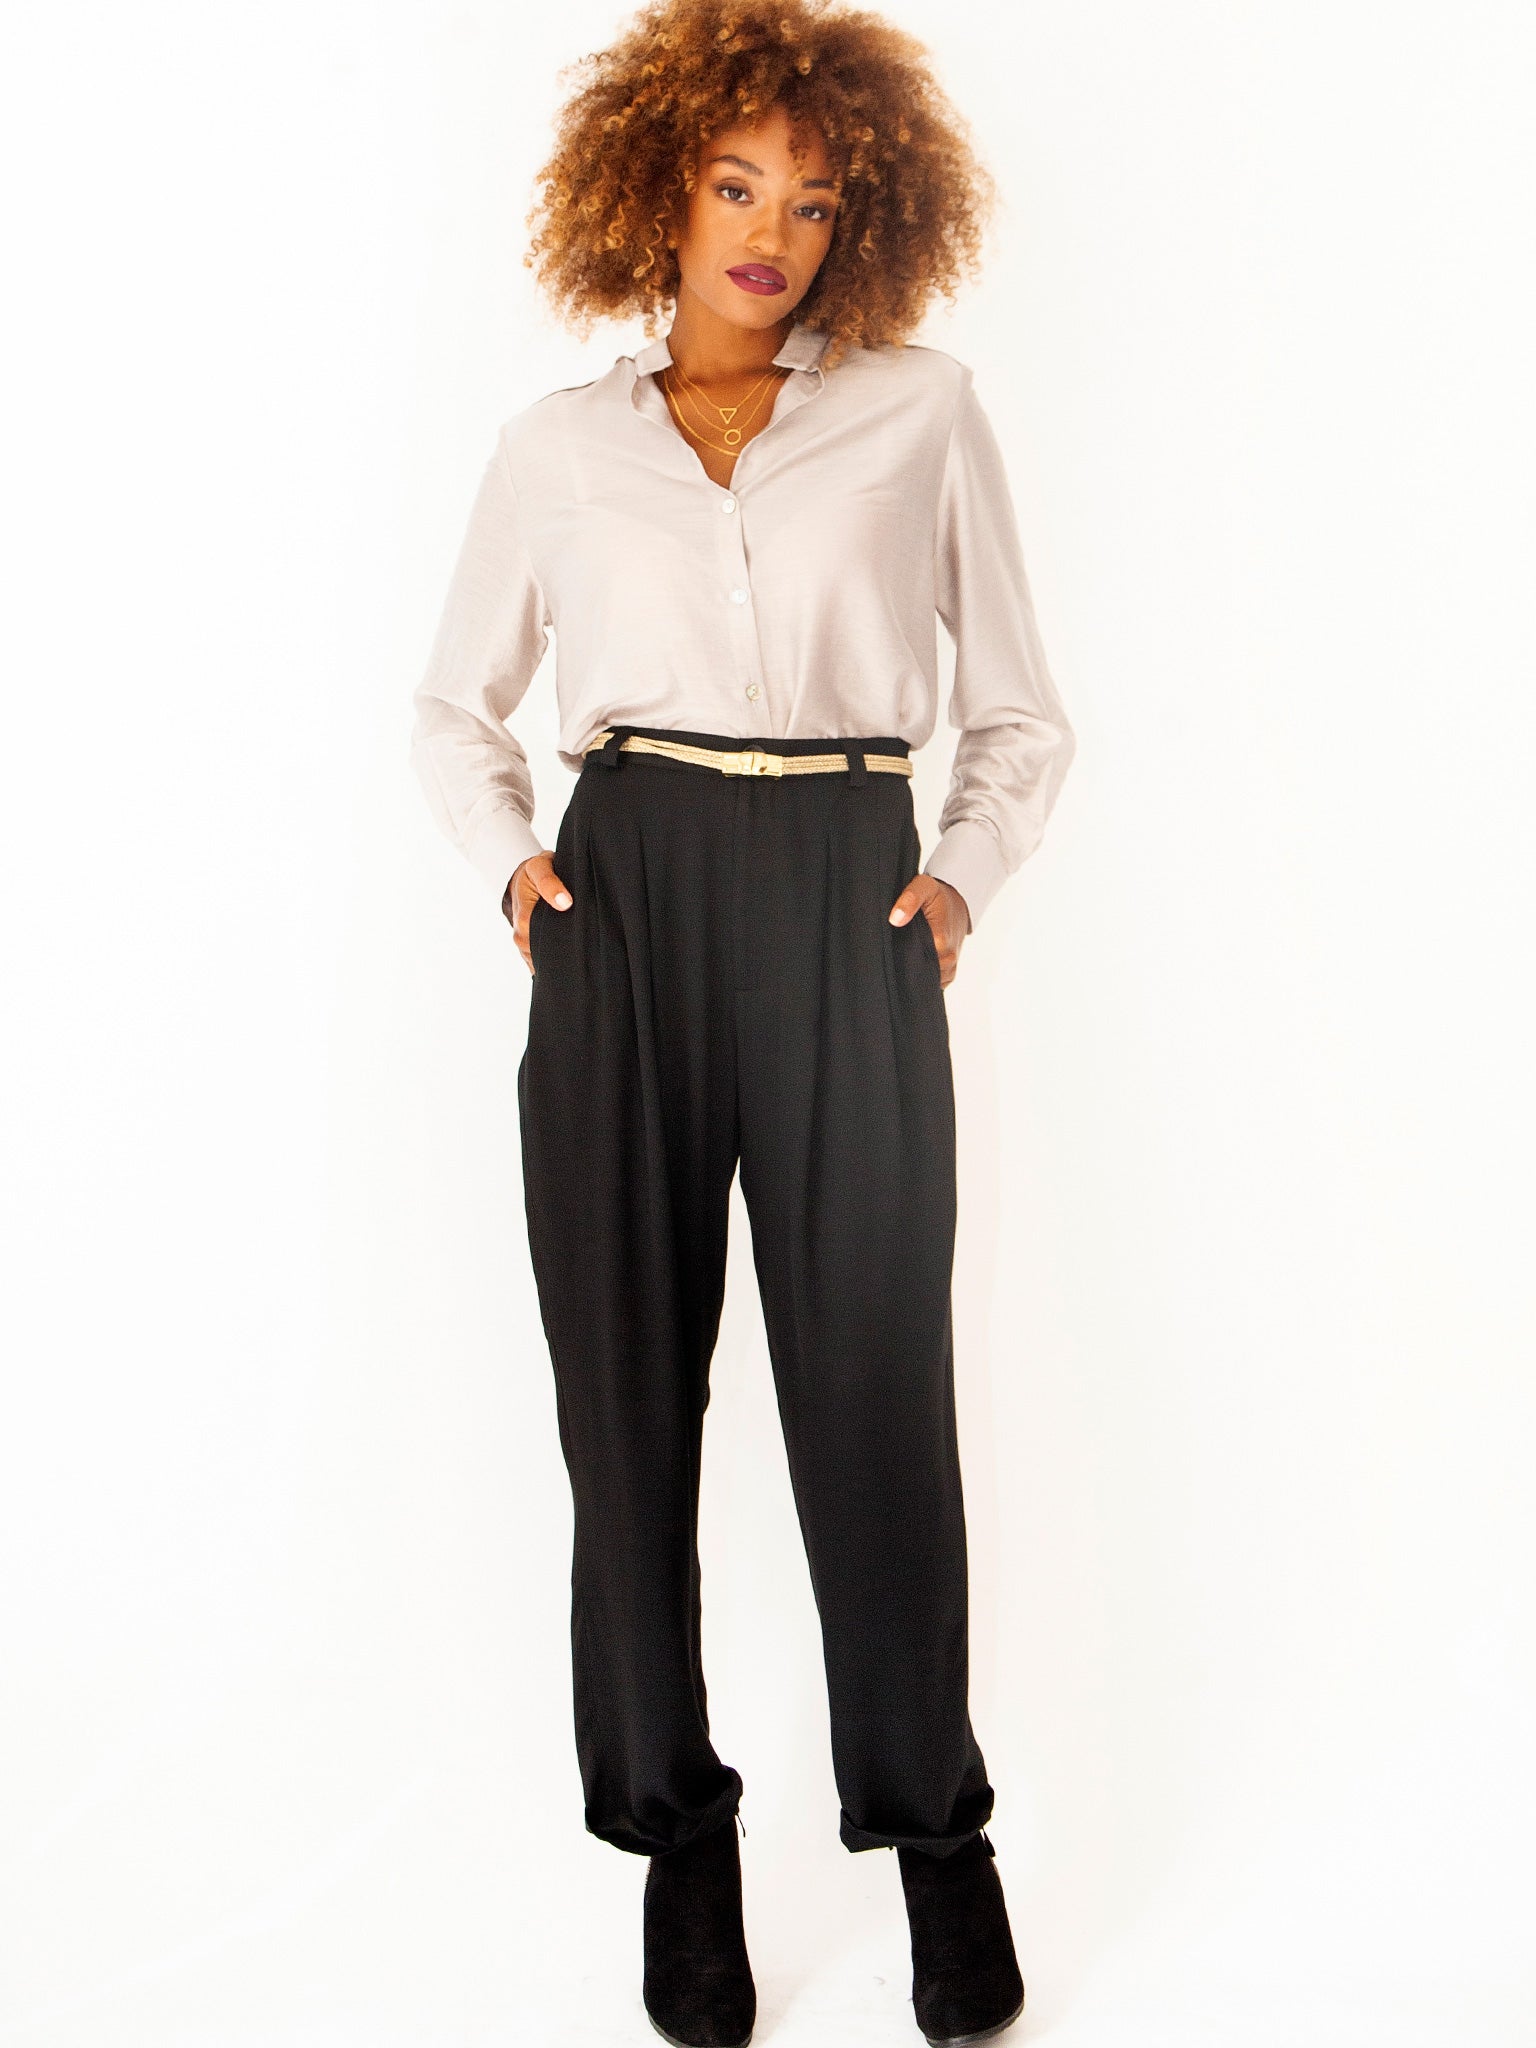 Black Office, Dinner And Cocktail Pants For Women